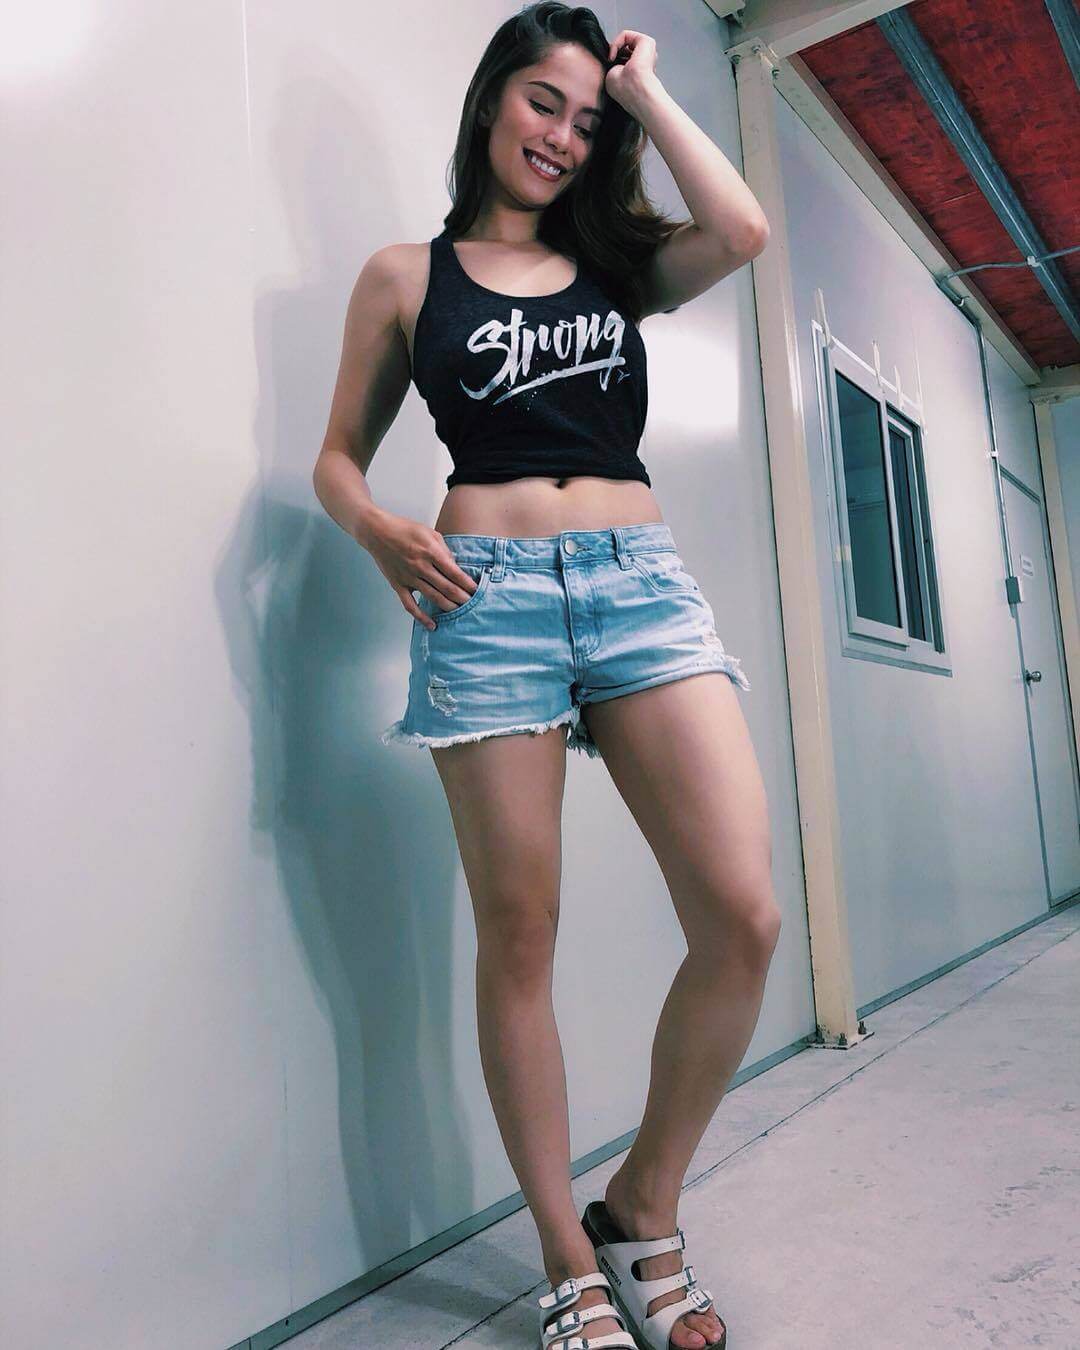 50 Sexy Photos Of Jessy Mendiola Will Make Your Day Better 12thblog 